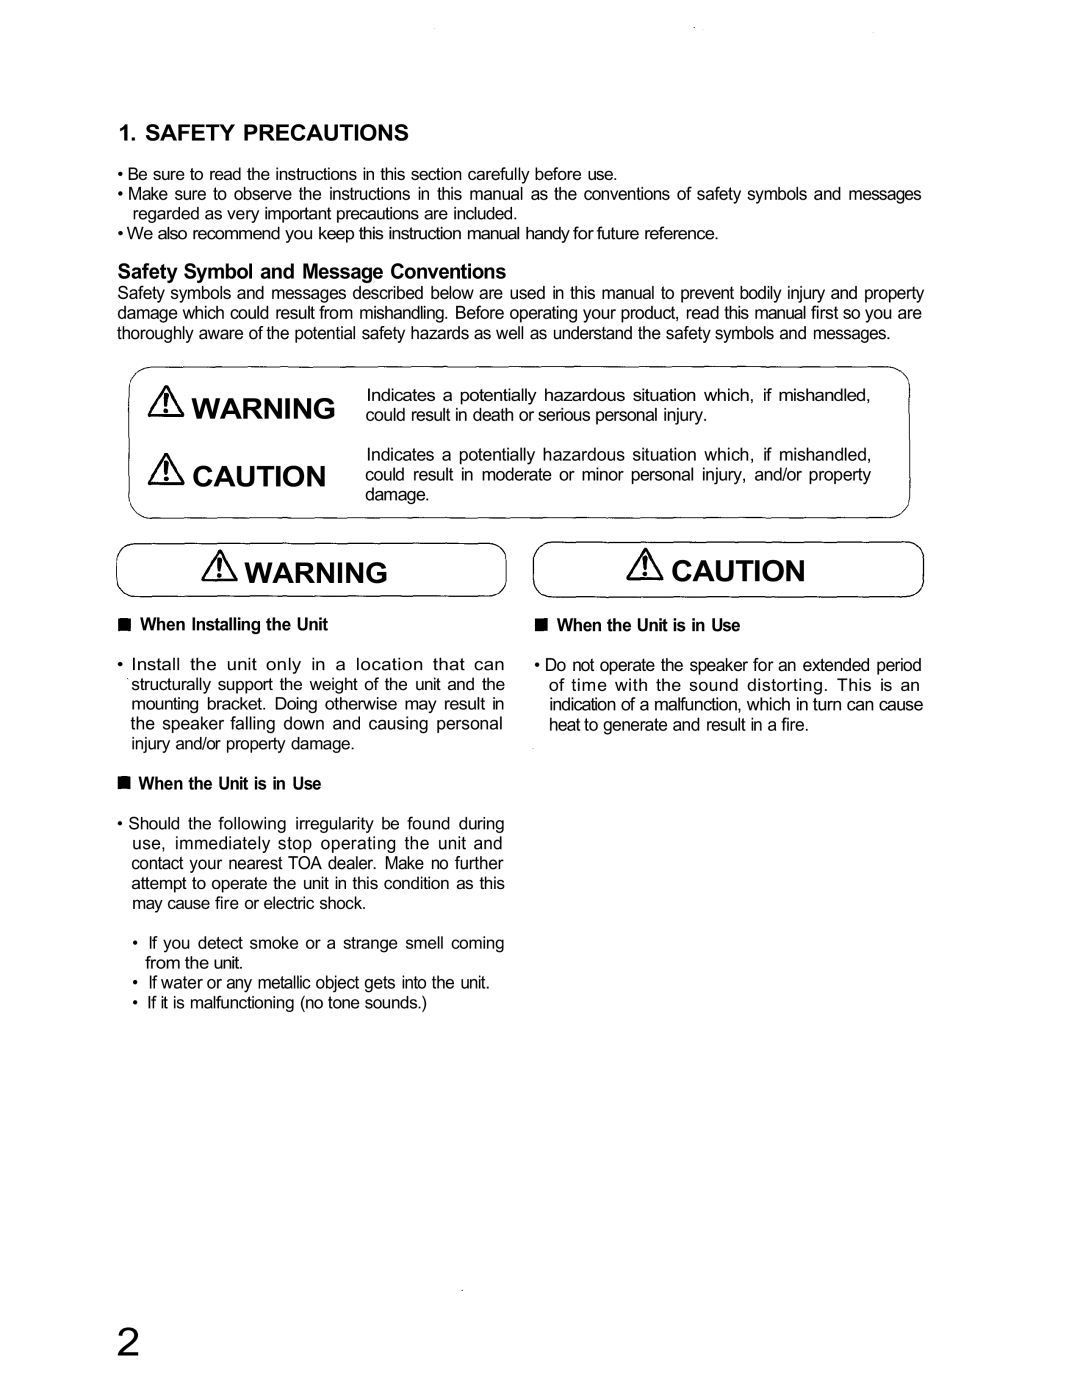 TOA Electronics H-1 Safety Precautions, Safety Symbol and Message Conventions, When Installing the Unit, Warningcaution 